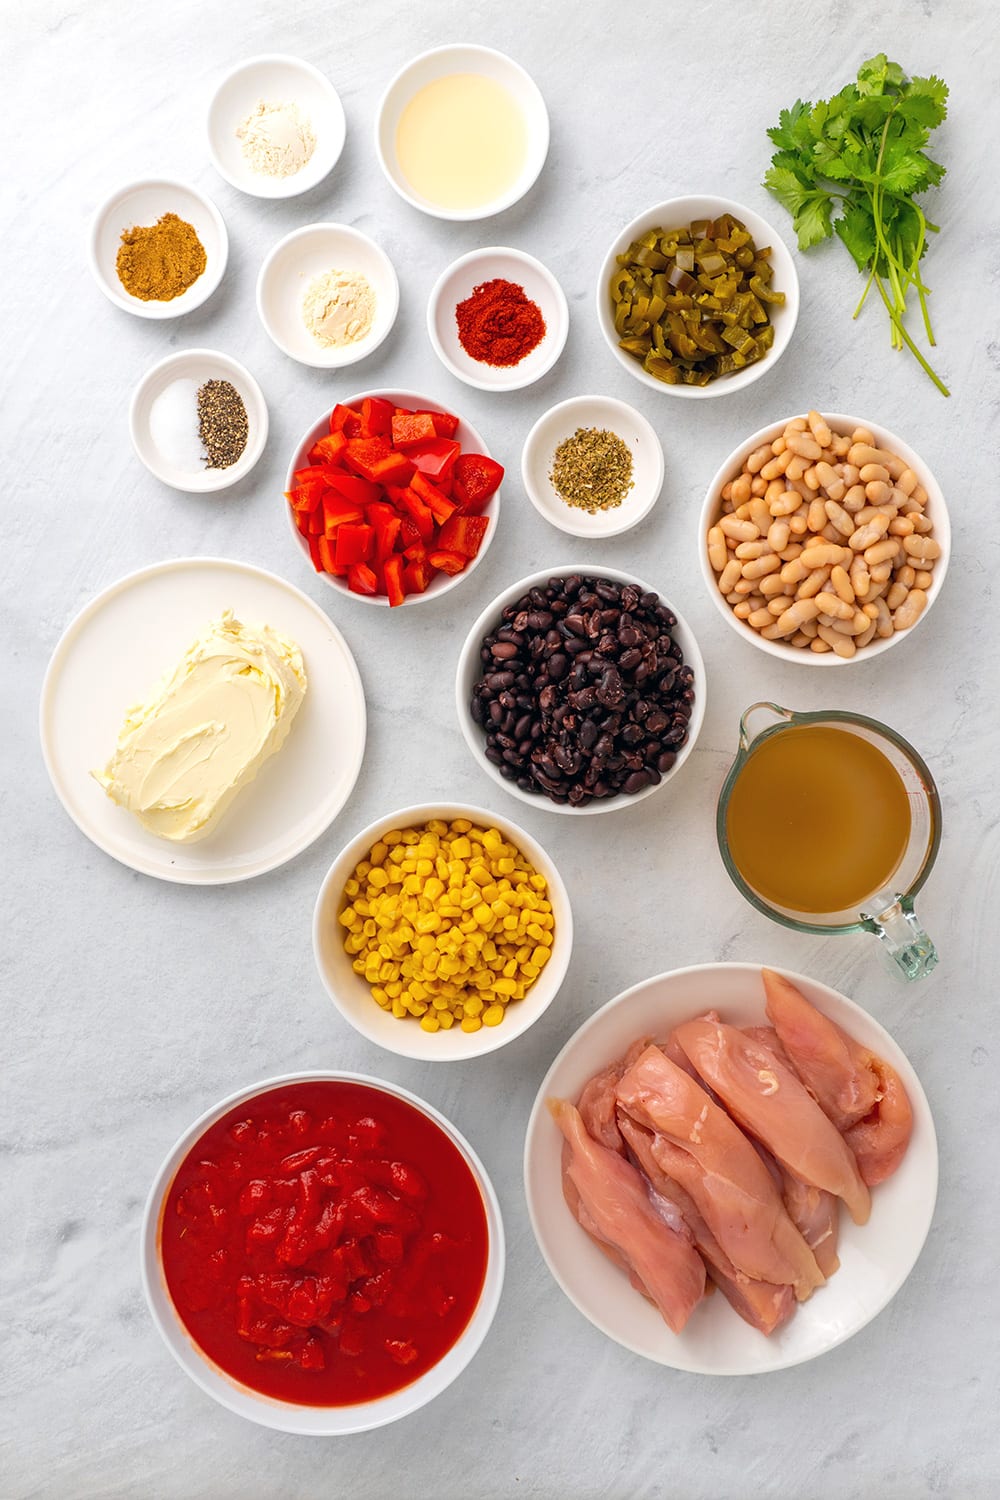 Ingredients for Instant Pot Chicken Taco Chili